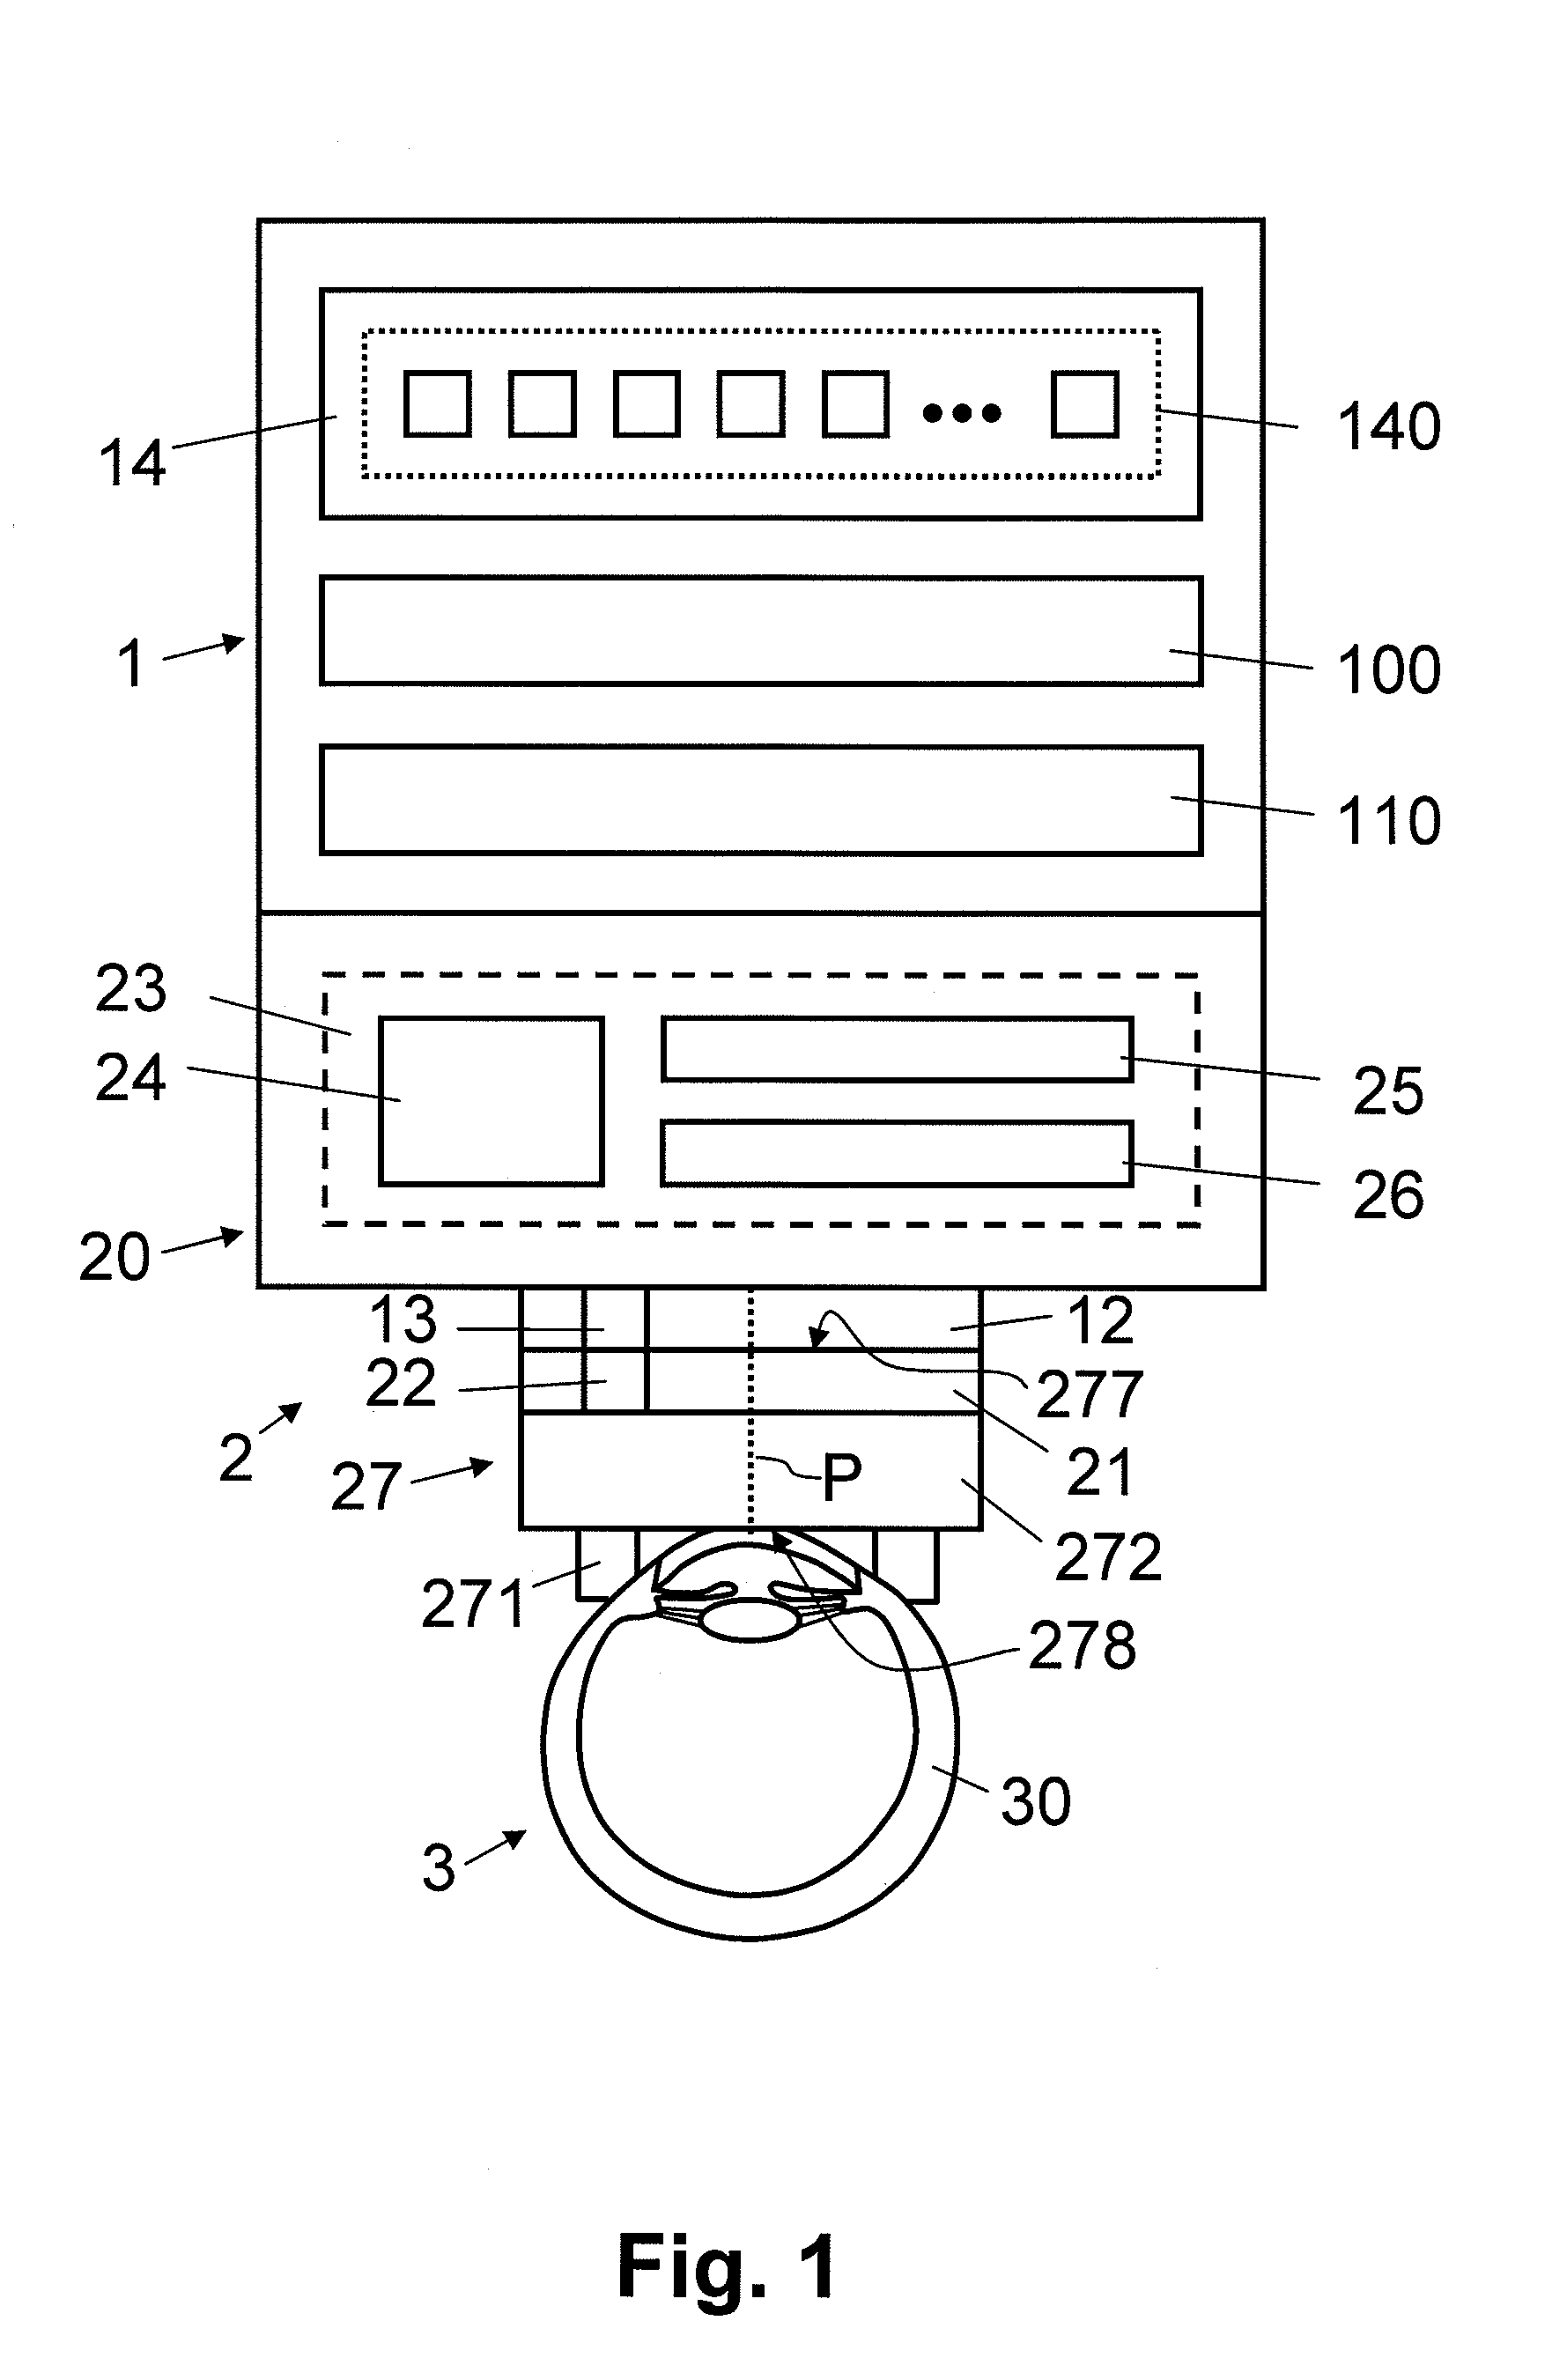 Apparatus for treating eye tissue with laser pulses